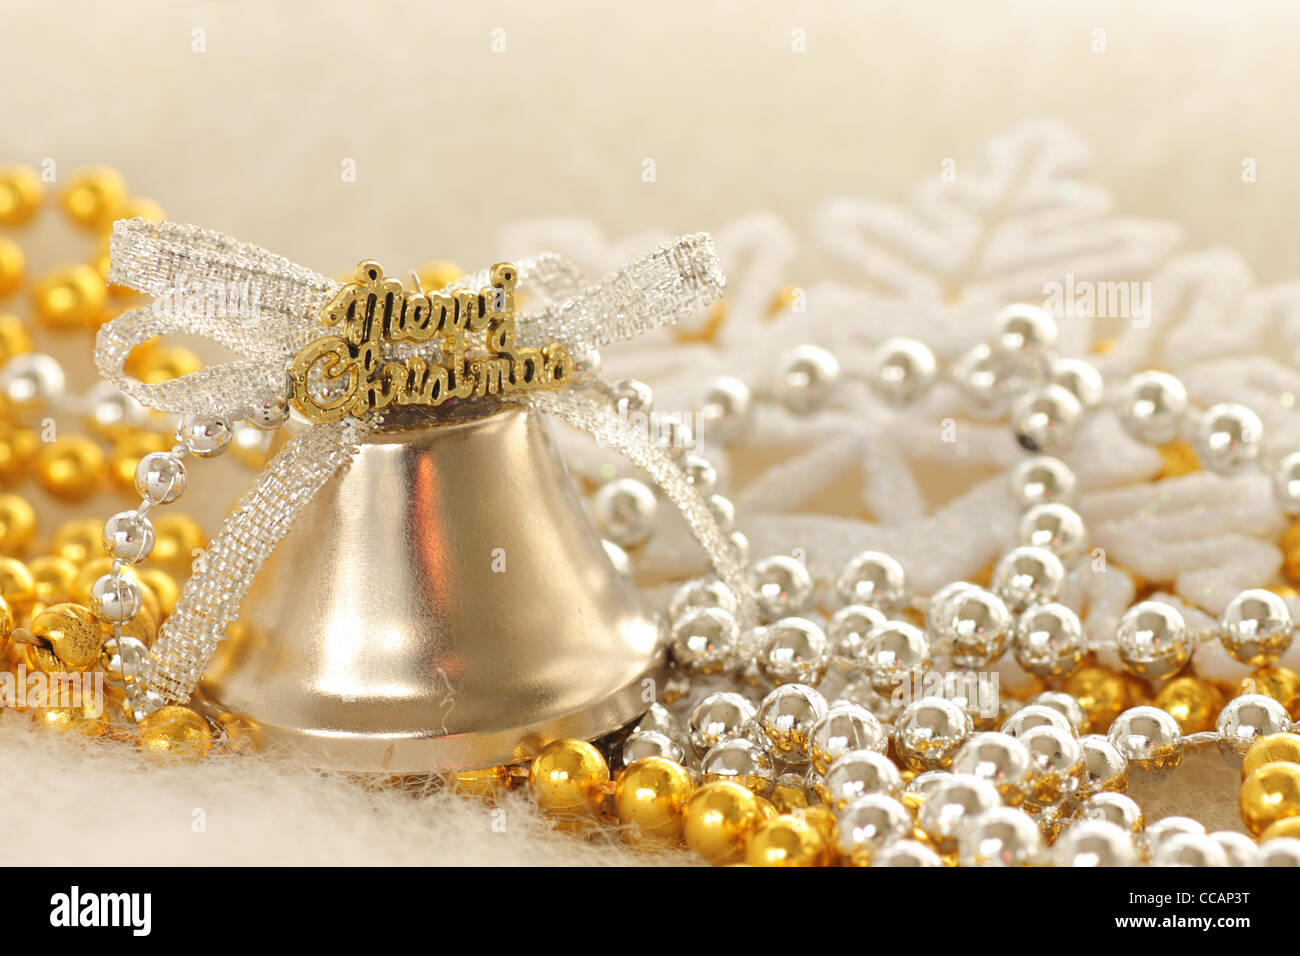 christmas tree decorations: merry christmas bell on beads Stock Photo